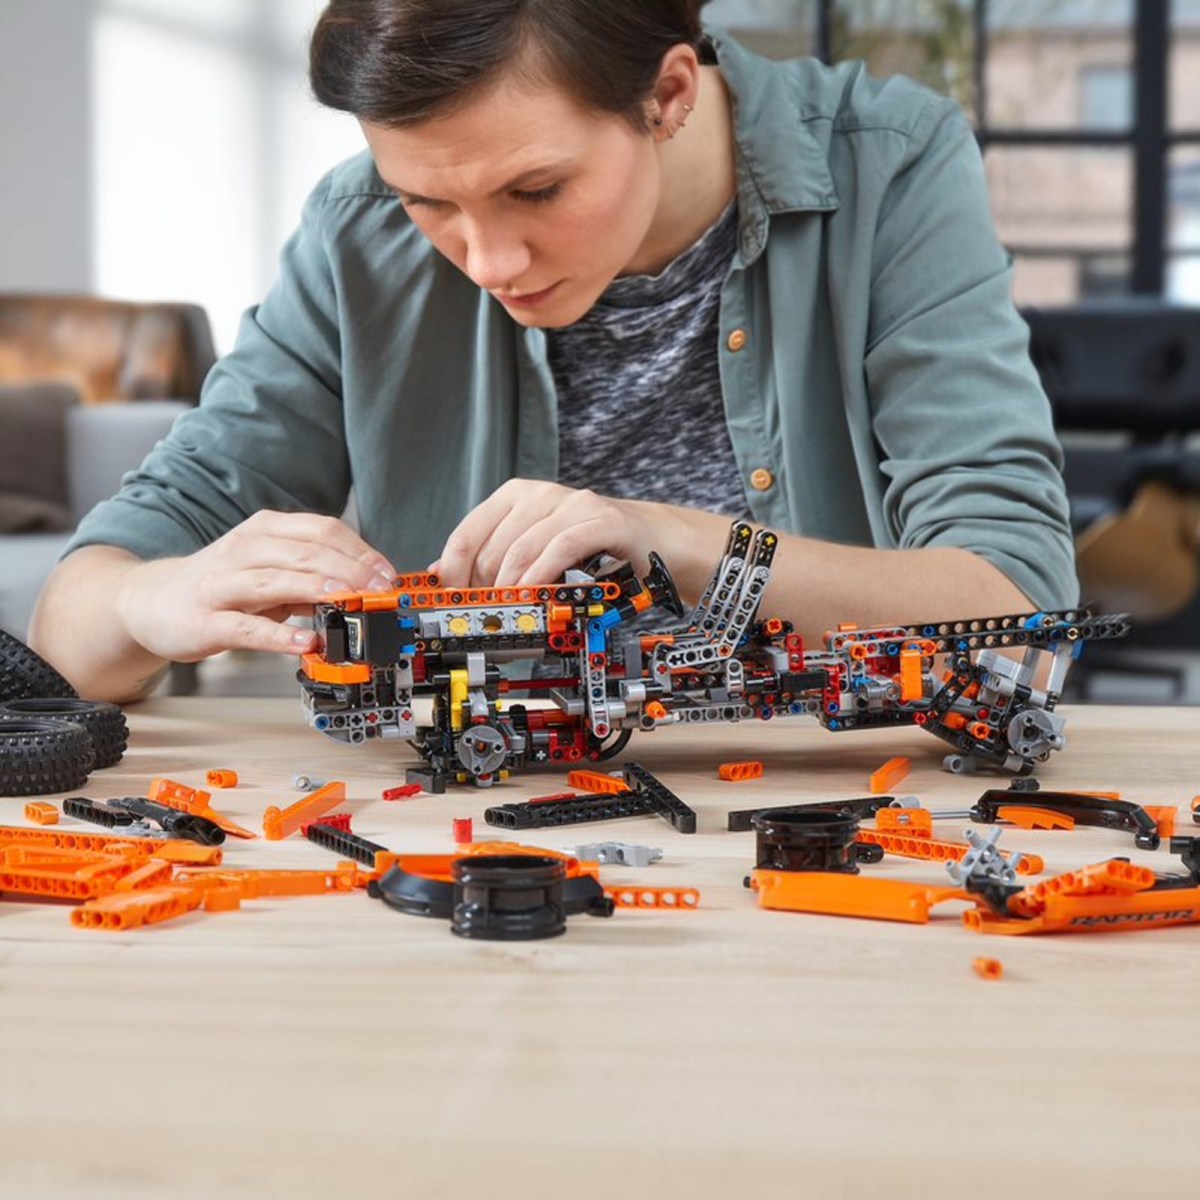 Rumor of 9 New LEGO Technic Sets Coming Next Year